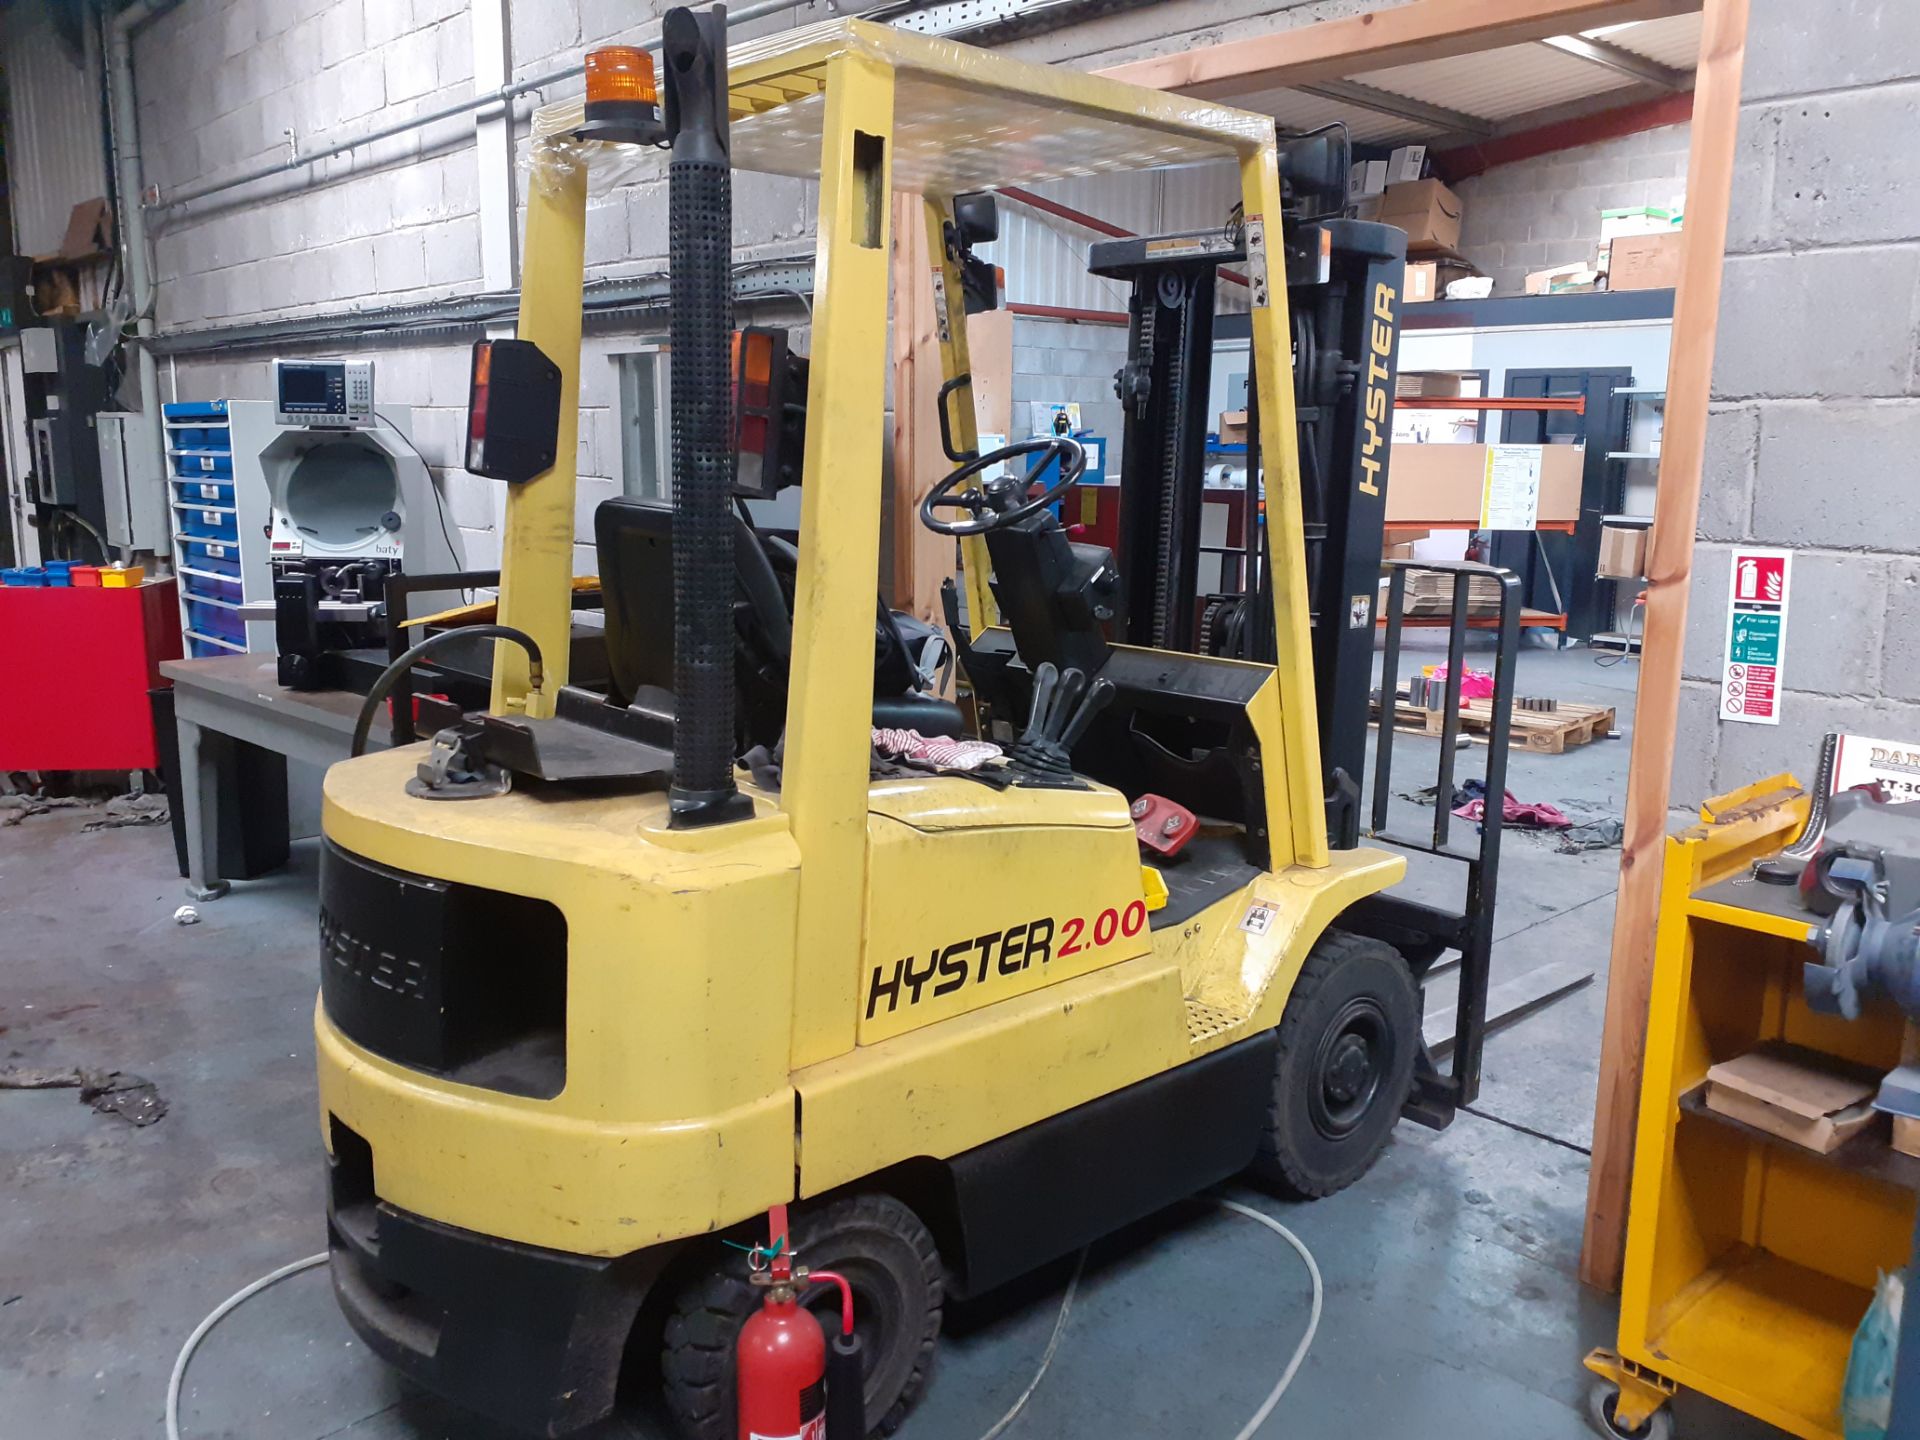 Hyster 2.00 XM 2 Ton LPG Forklift Truck, Serial Number 0001B033788 fitted Triple Stage Mast & Side